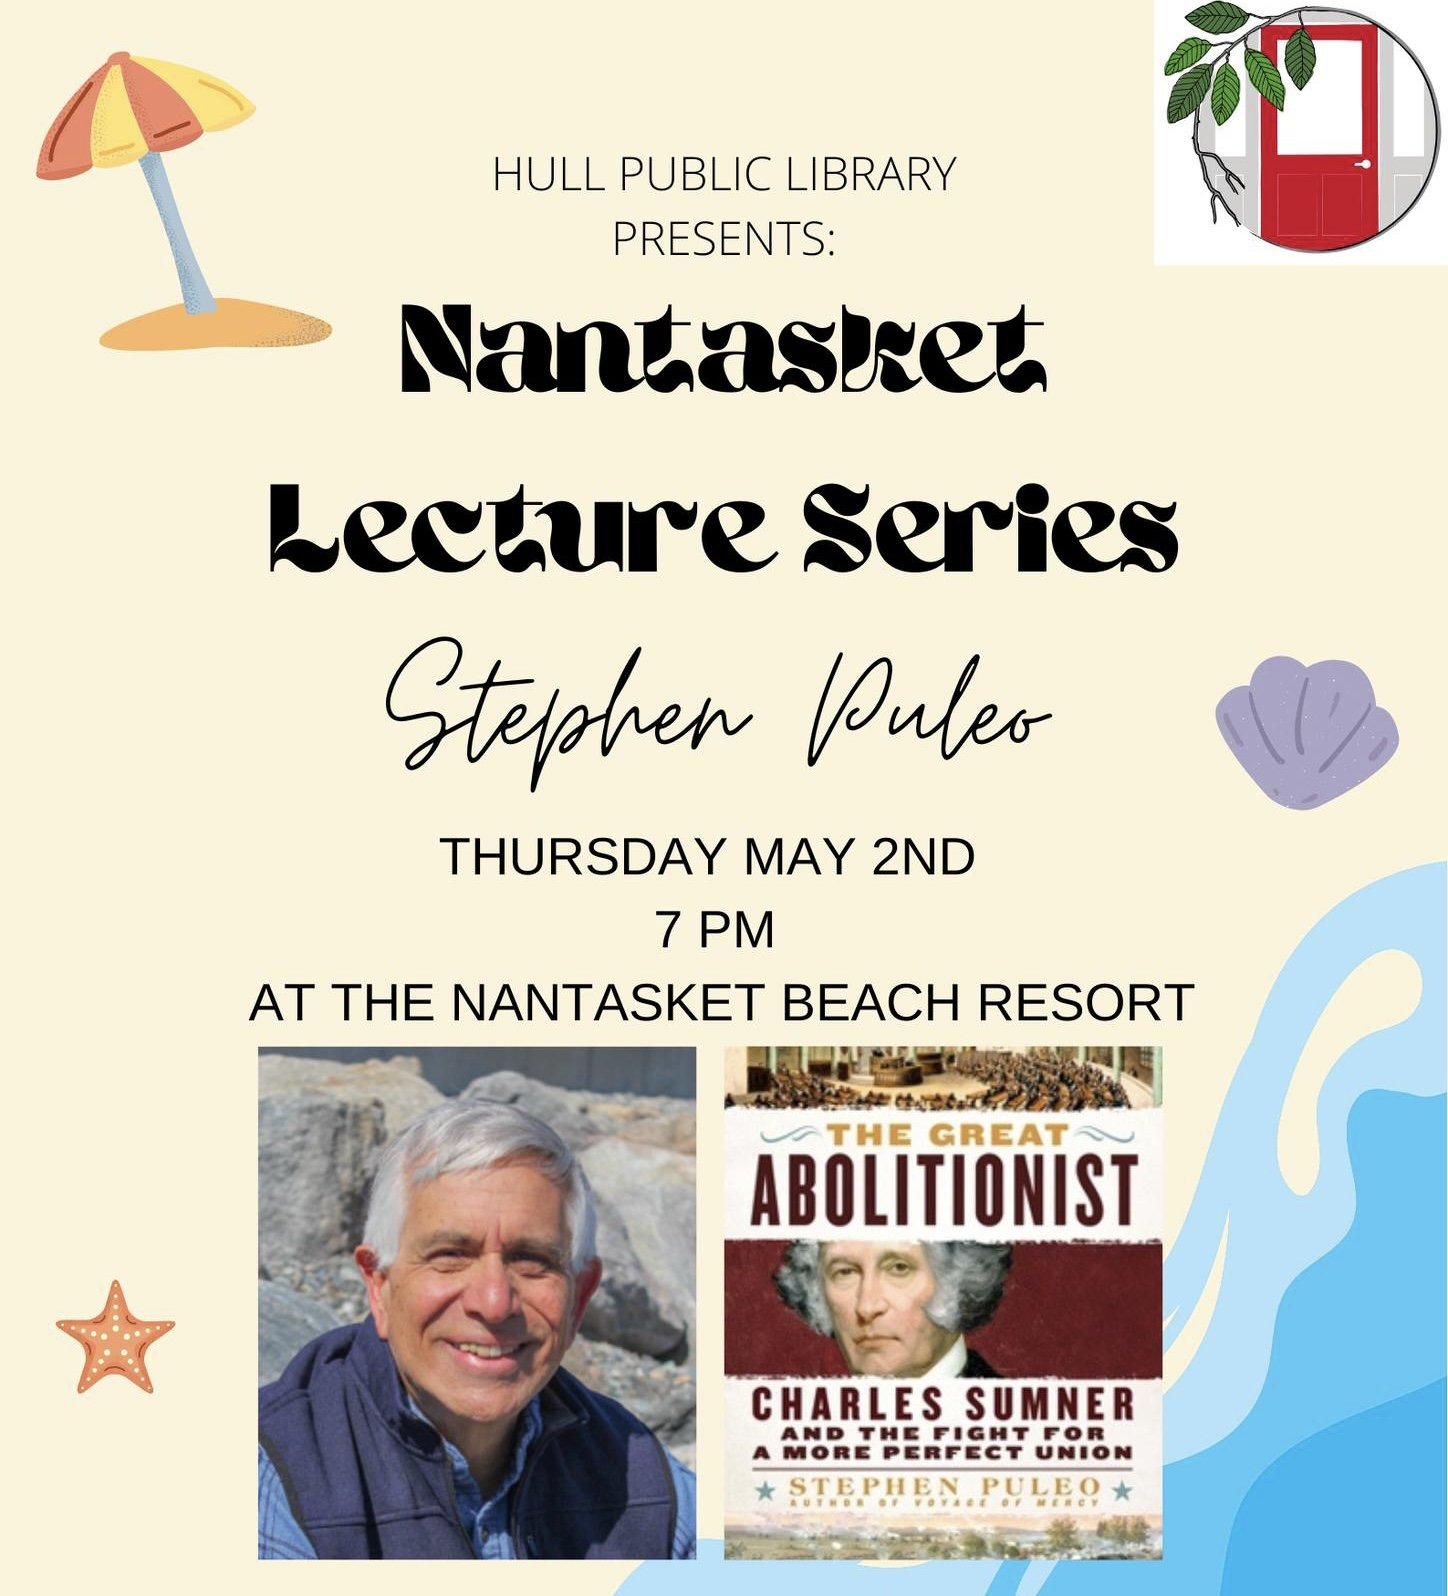 Mark your calendars! This author appearance is sponsored by the Friends of the Hull Public Library, Buttonwood Books &amp; Toys, and the Nantasket Beach Resort. #hullma #hullmanews #nantasket #MALocalNews #hulltimes #southshorenews